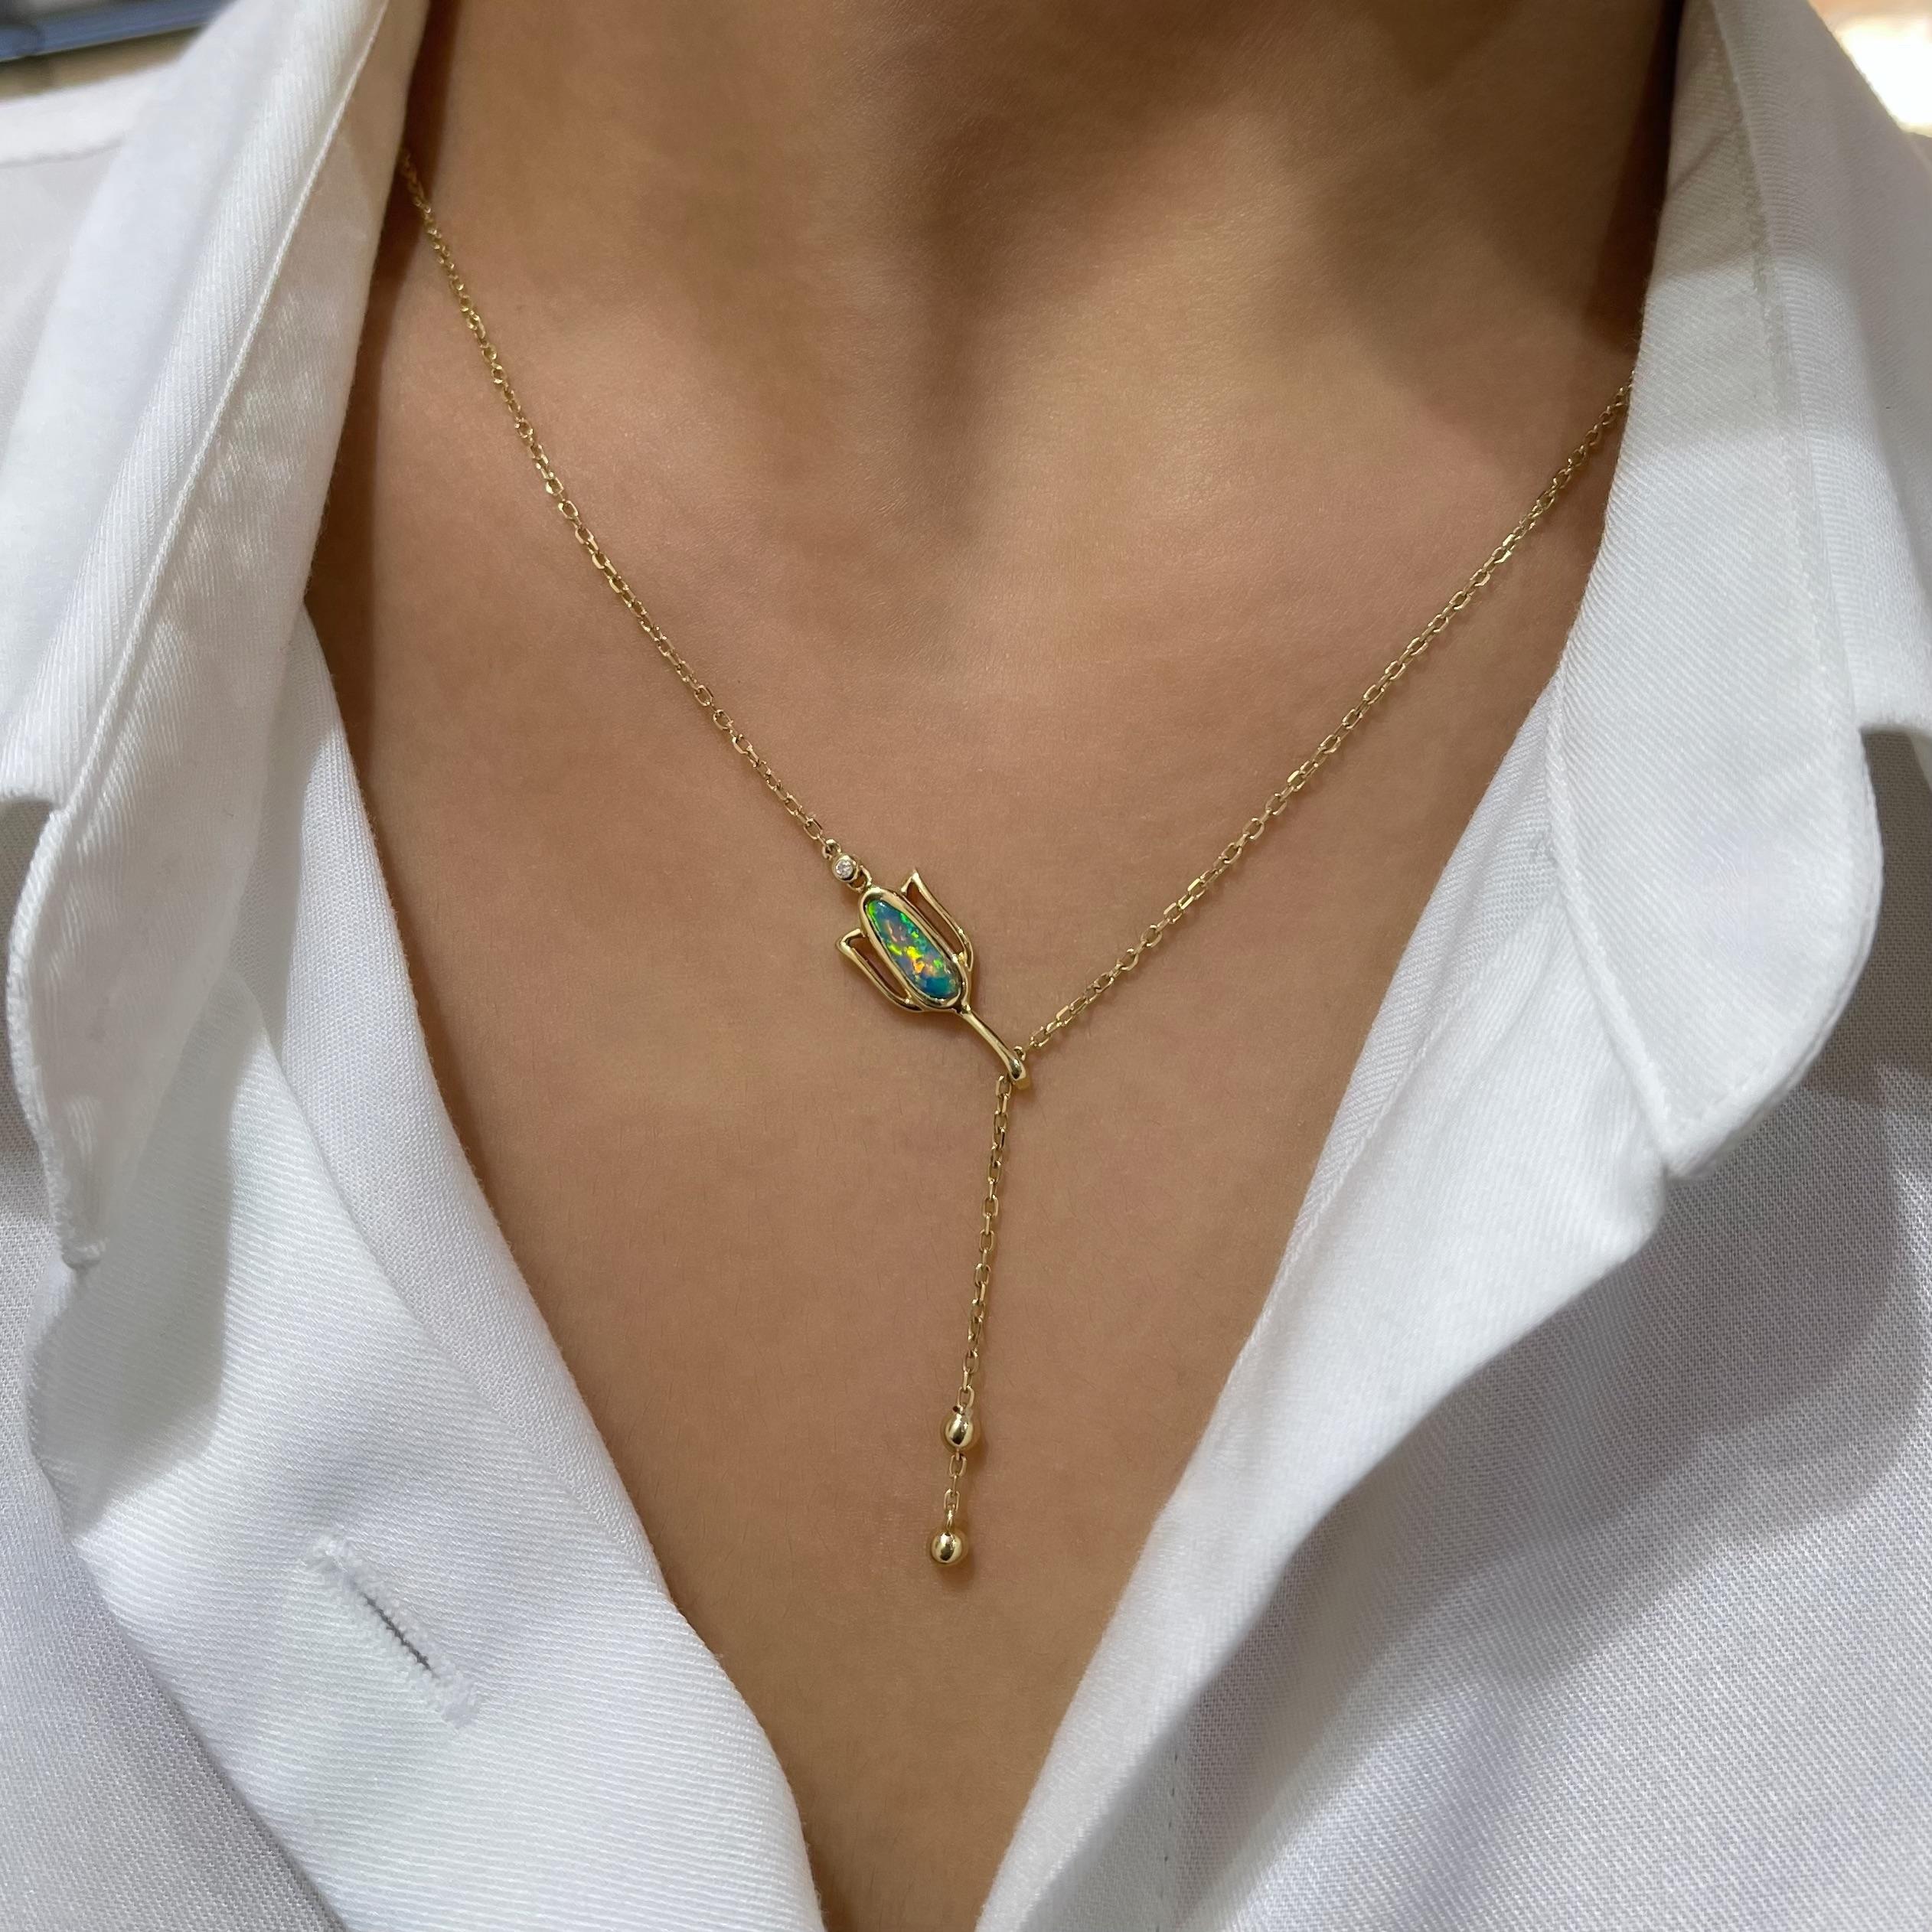 “Fairy’s Tulip” opal pendant is Tinker Bell’s best kept secret. A magical black opal (0.51ct) set in 18K yellow gold is topped with a shiny diamond. This enchanting jewellery piece features a chain that adjusts to different lengths and is finished